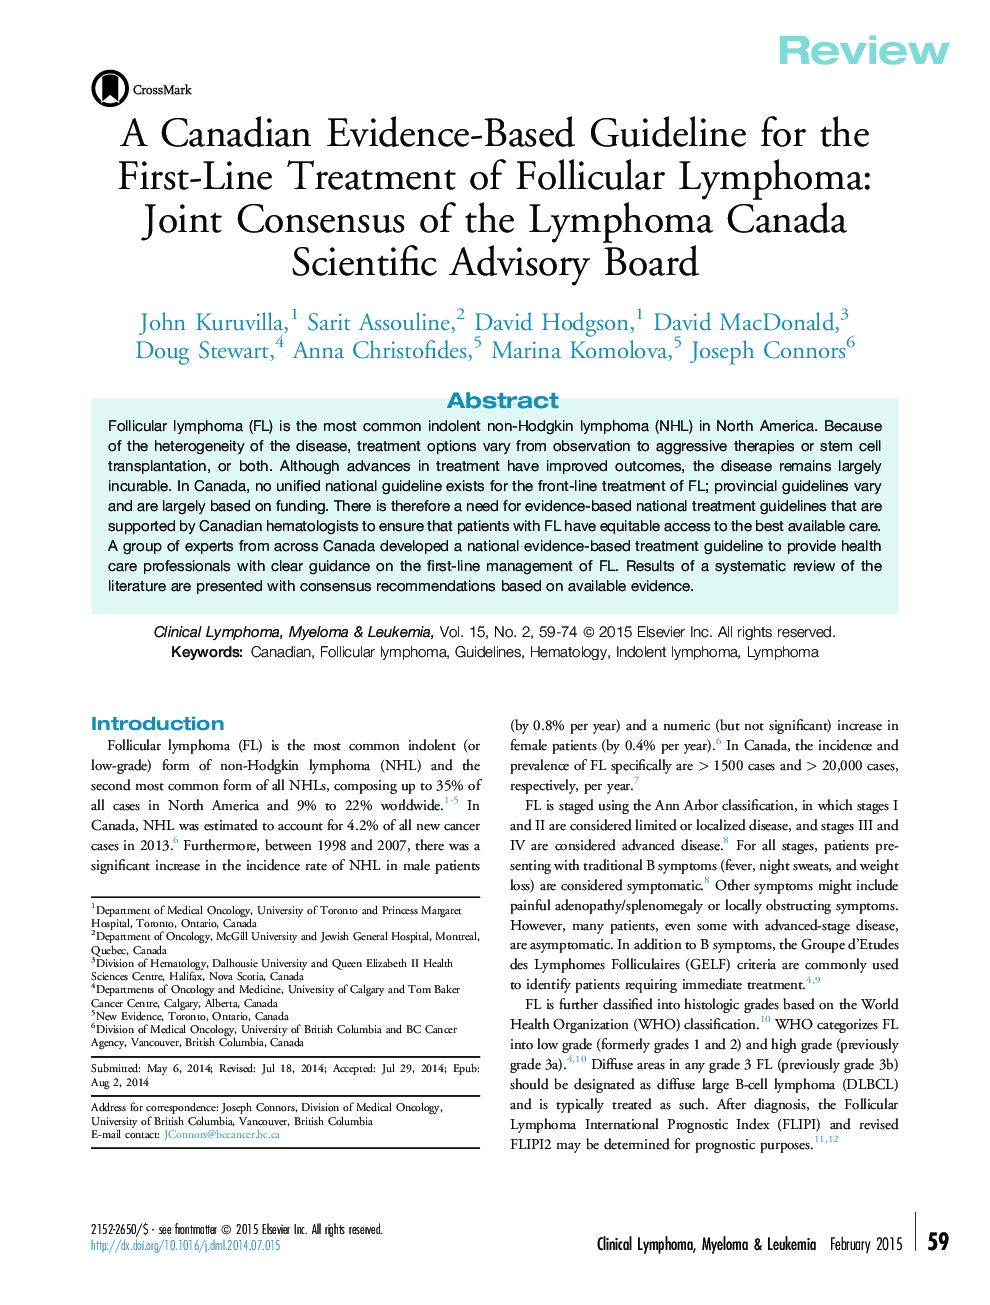 A Canadian Evidence-Based Guideline for the First-Line Treatment of Follicular Lymphoma: Joint Consensus of the Lymphoma Canada Scientific Advisory Board